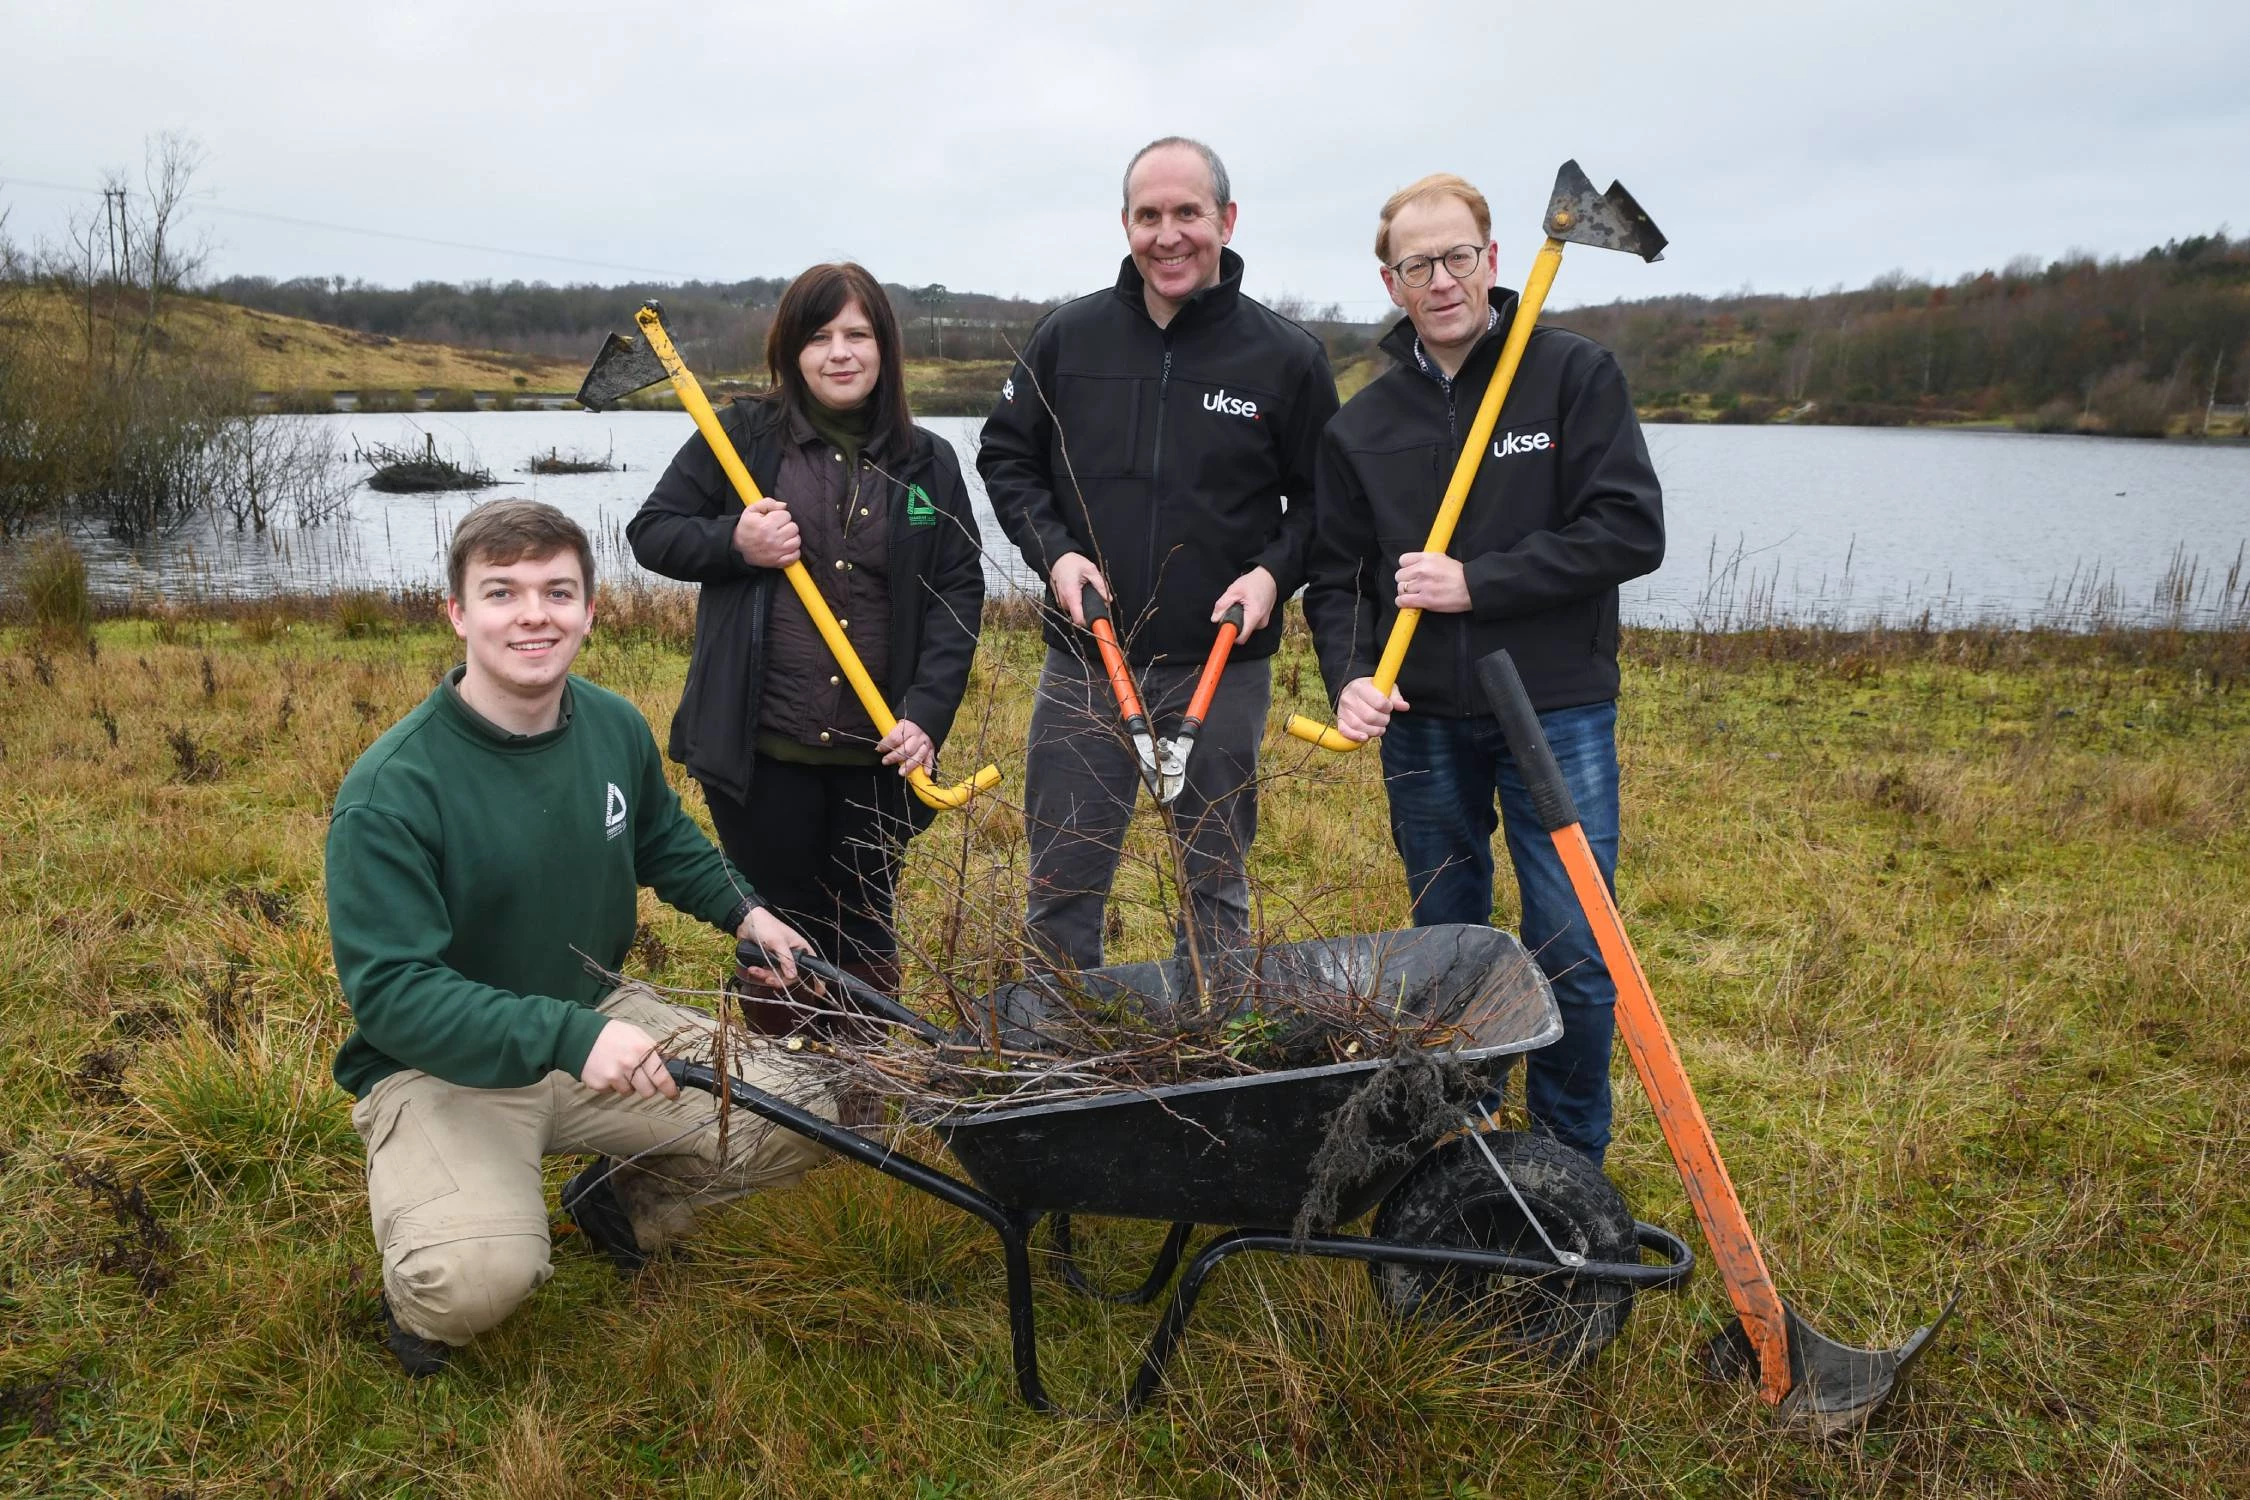 From left, Groundwork project officer Tom Beardmore, land and environment manager Melissa Underwood, Mike Lowe and Steve Grice of UKSE